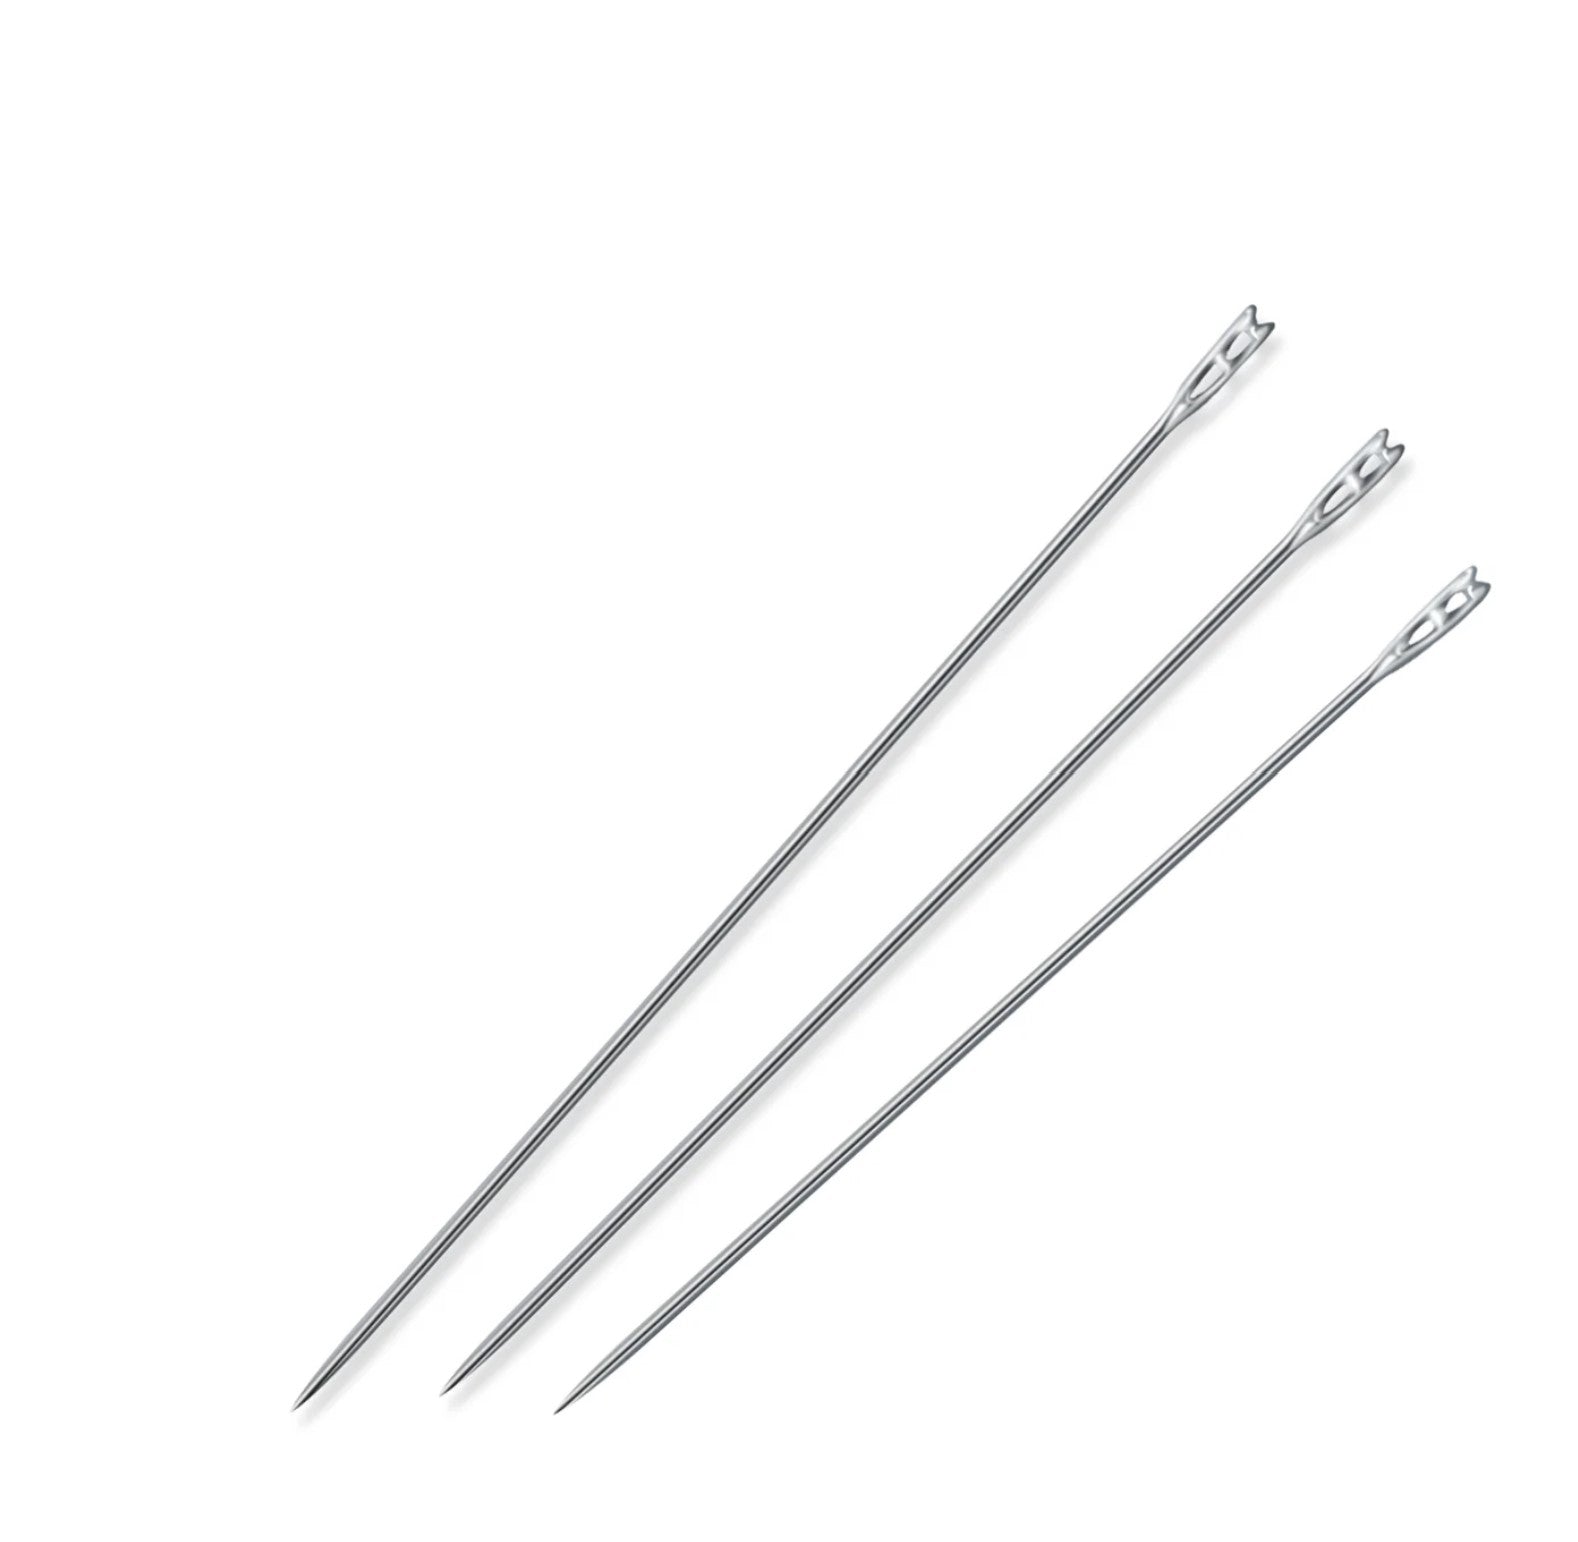 Easy-Threading Hand Sewing Needles (Sizes: 4 / 8) by Dritz®